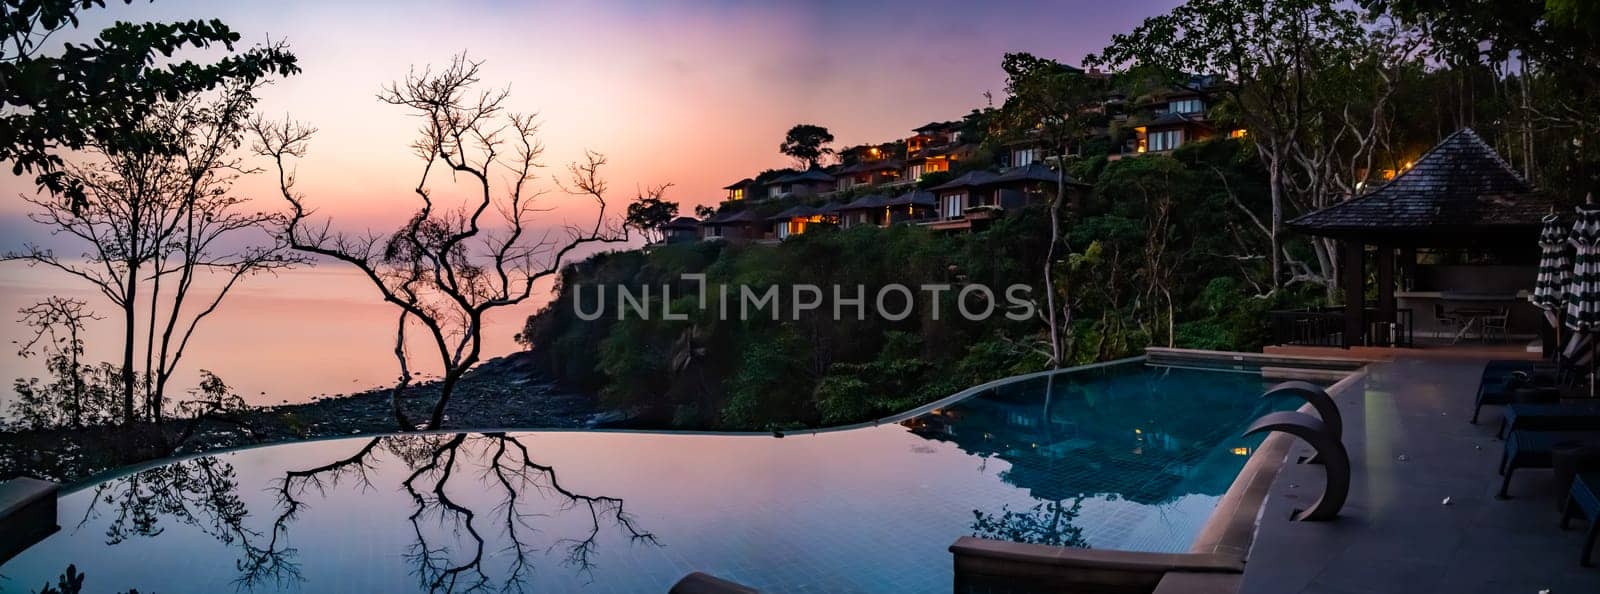 View of resort in Panwa beach at sunset, in Phuket, Thailand, south east Asia